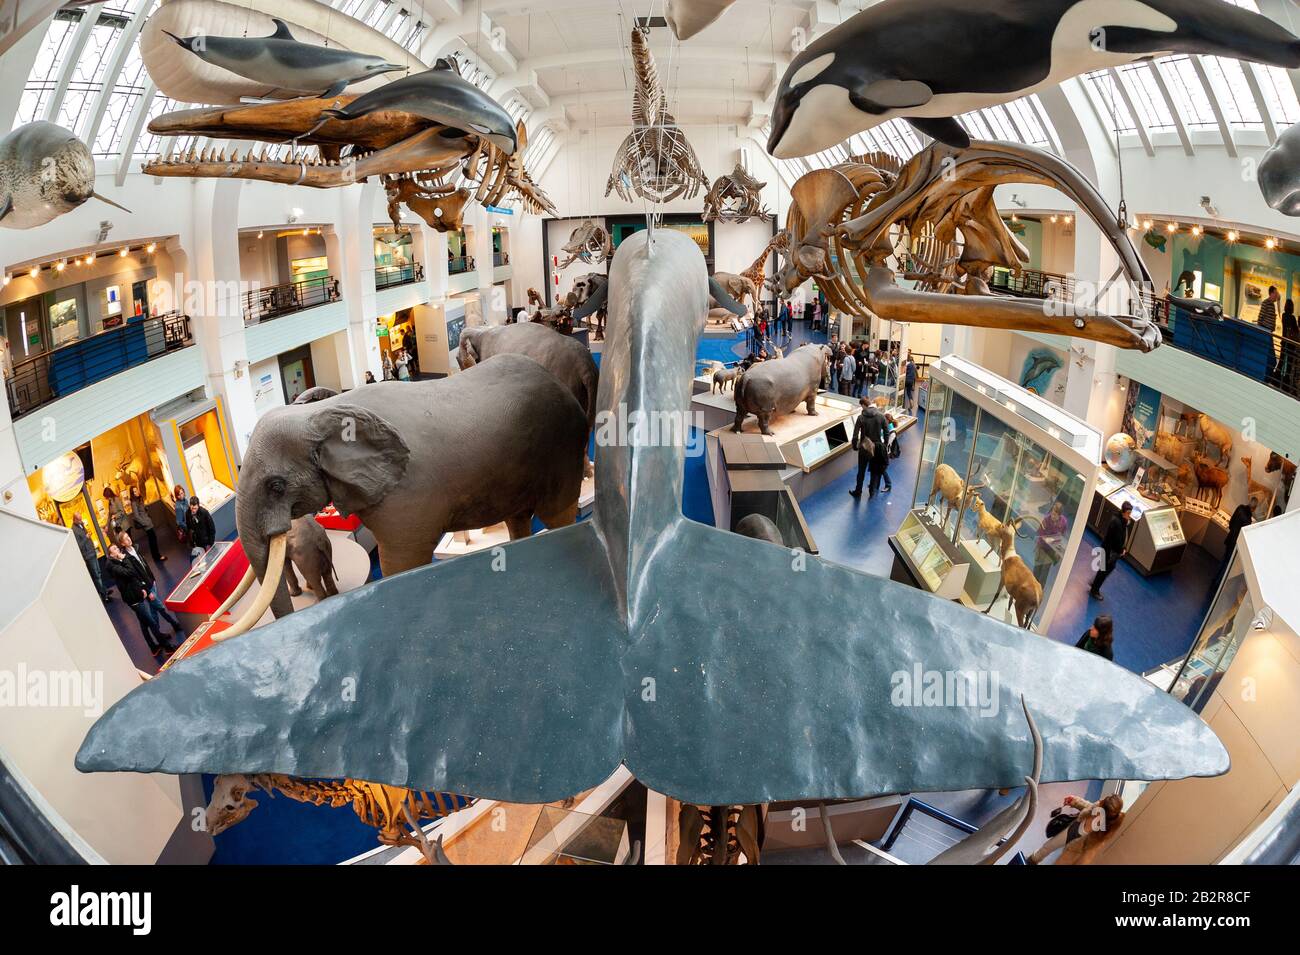 Tail fin of a life-size model of a blue whale in the Natural History Museum, London, UK Stock Photo